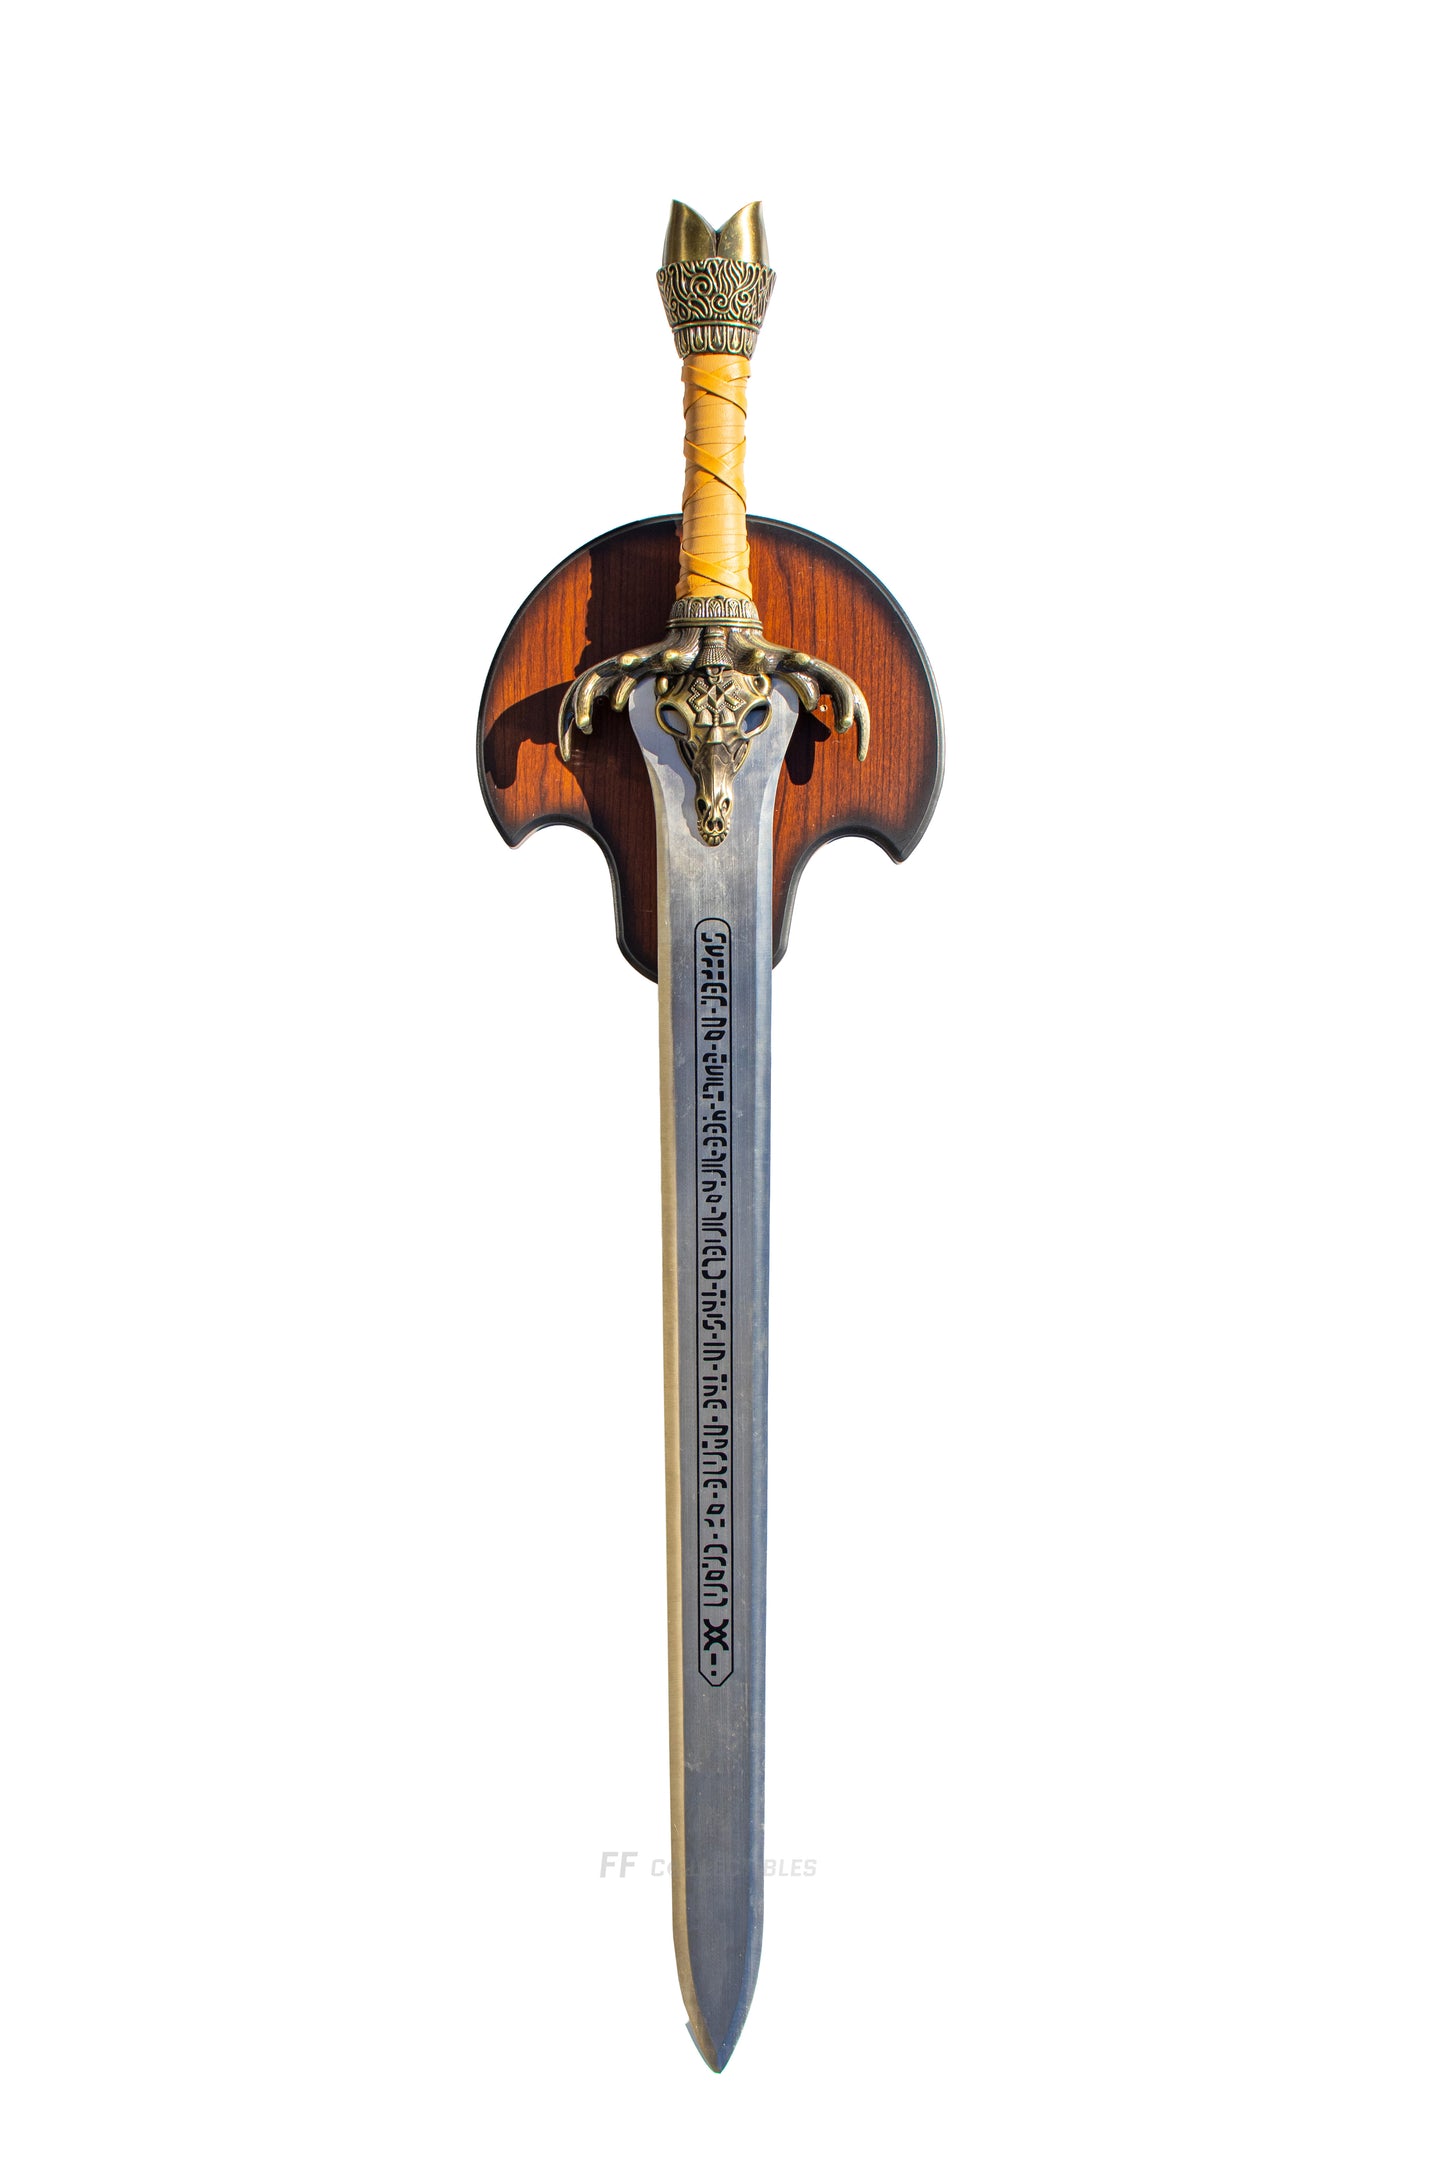 CONAN THE BARBARIAN - THE FATHER'S SWORD (with FREE WALL PLAQUE)